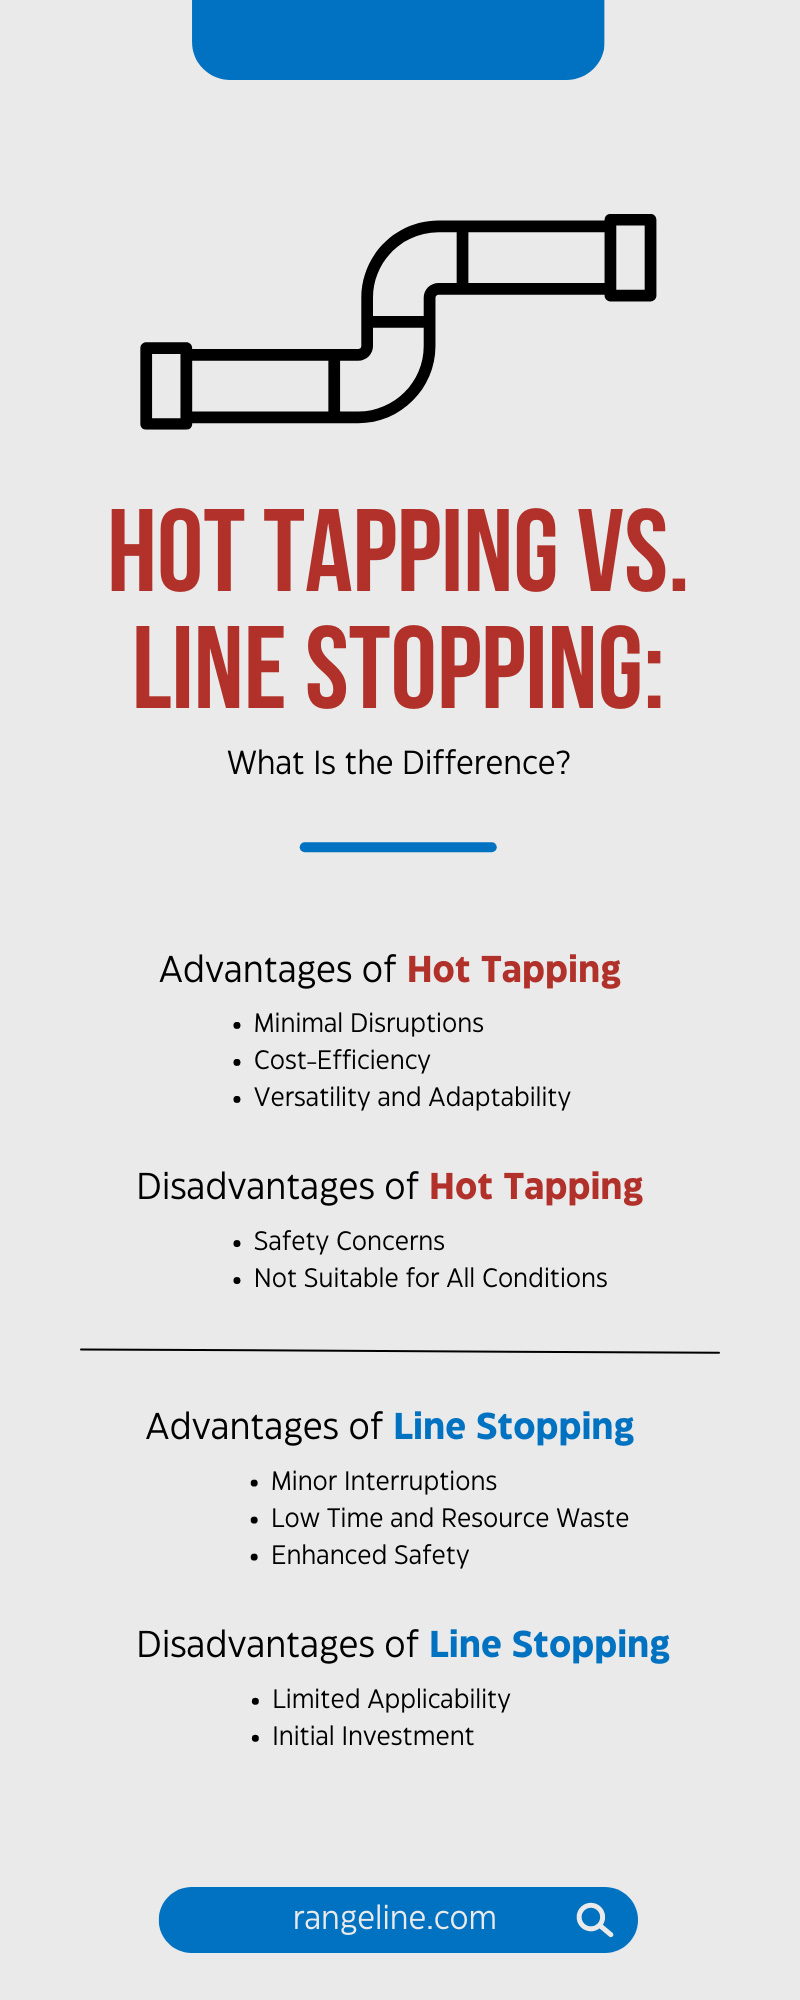 Hot Tapping vs. Line Stopping: What Is the Difference?